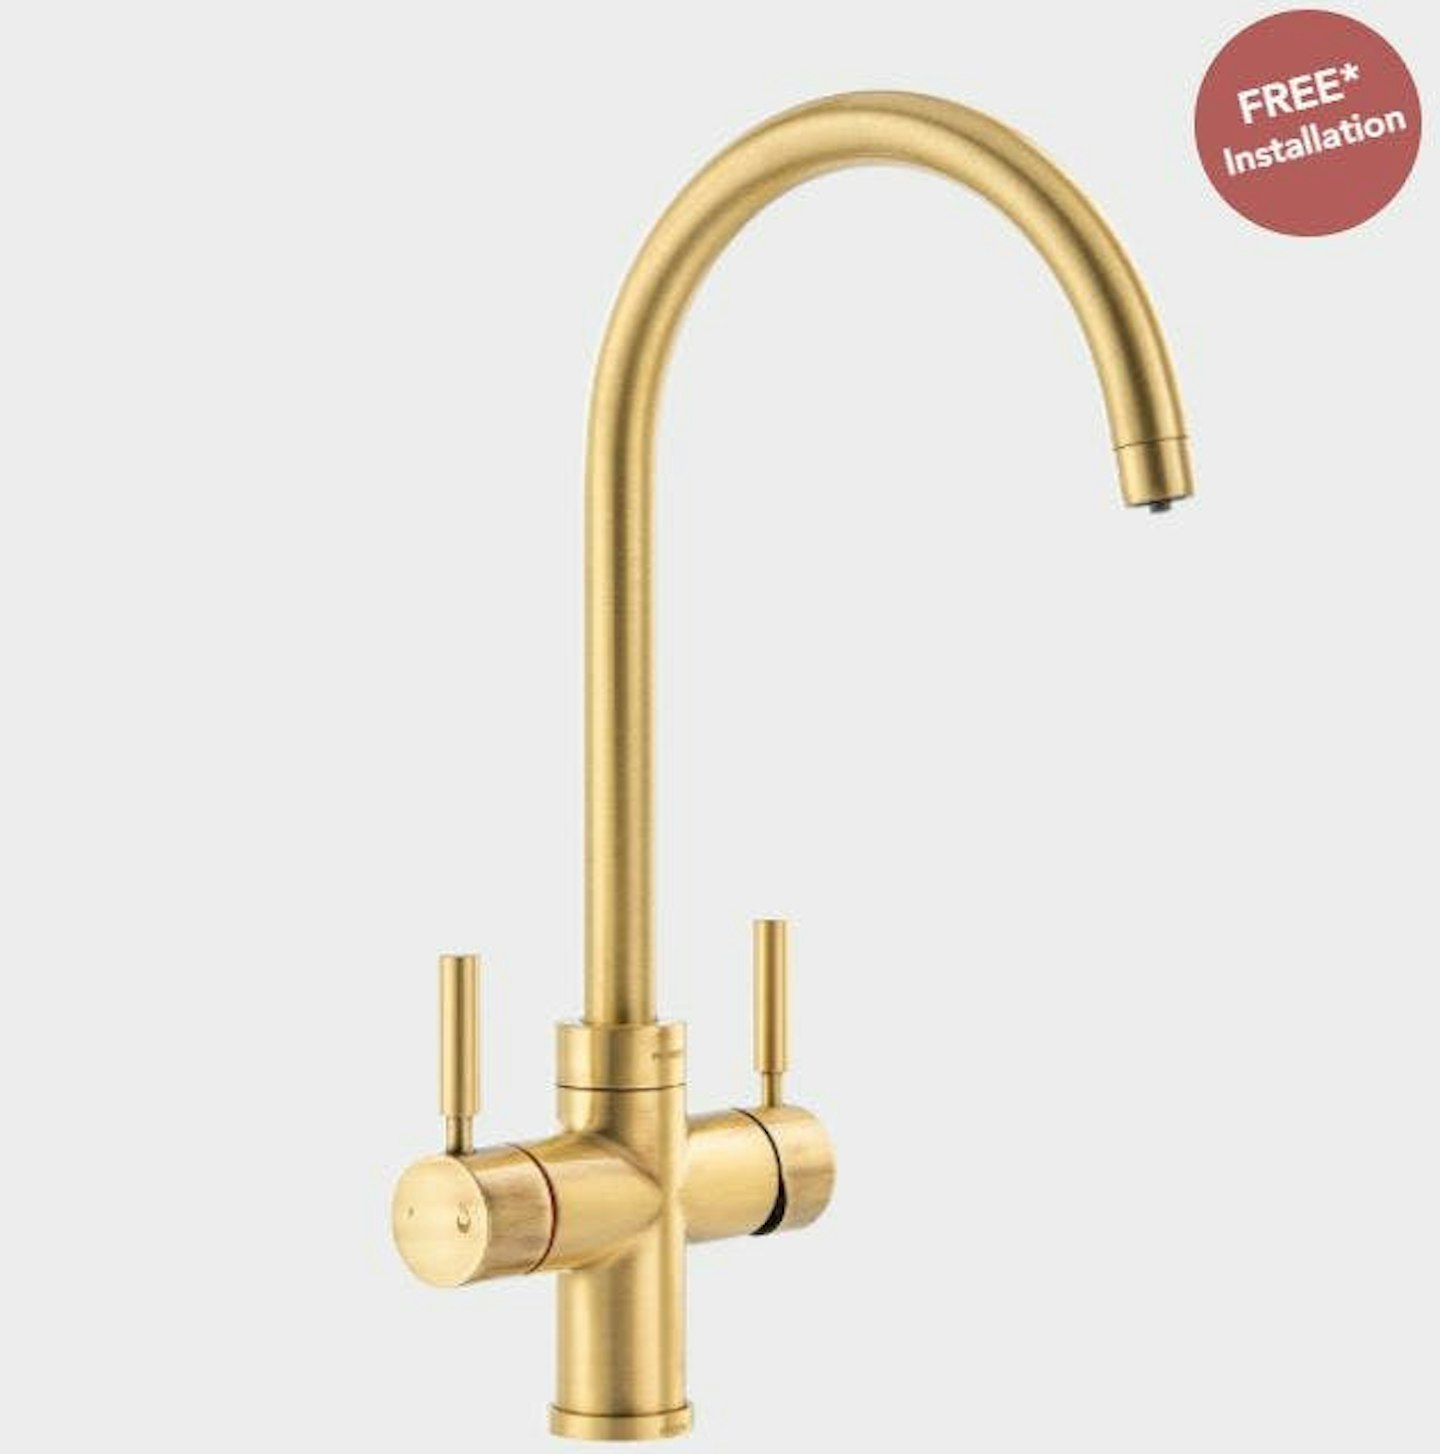 Best boiling water taps:  Abode Pronteau Propure 4 in 1 Boiling Water Tap